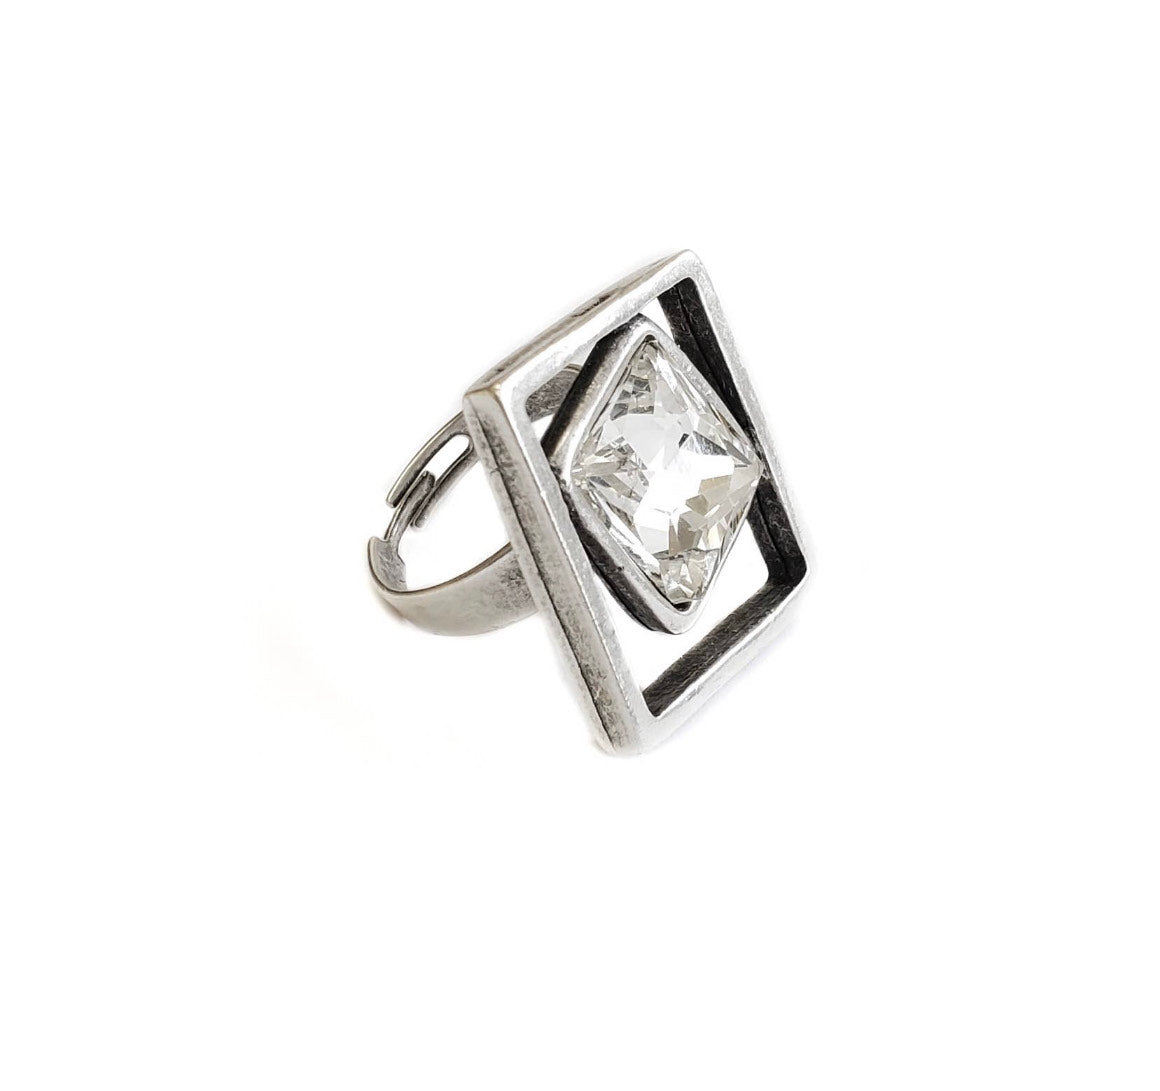 CHANOUR Just be square! Handmade Pewter and Silver Ring